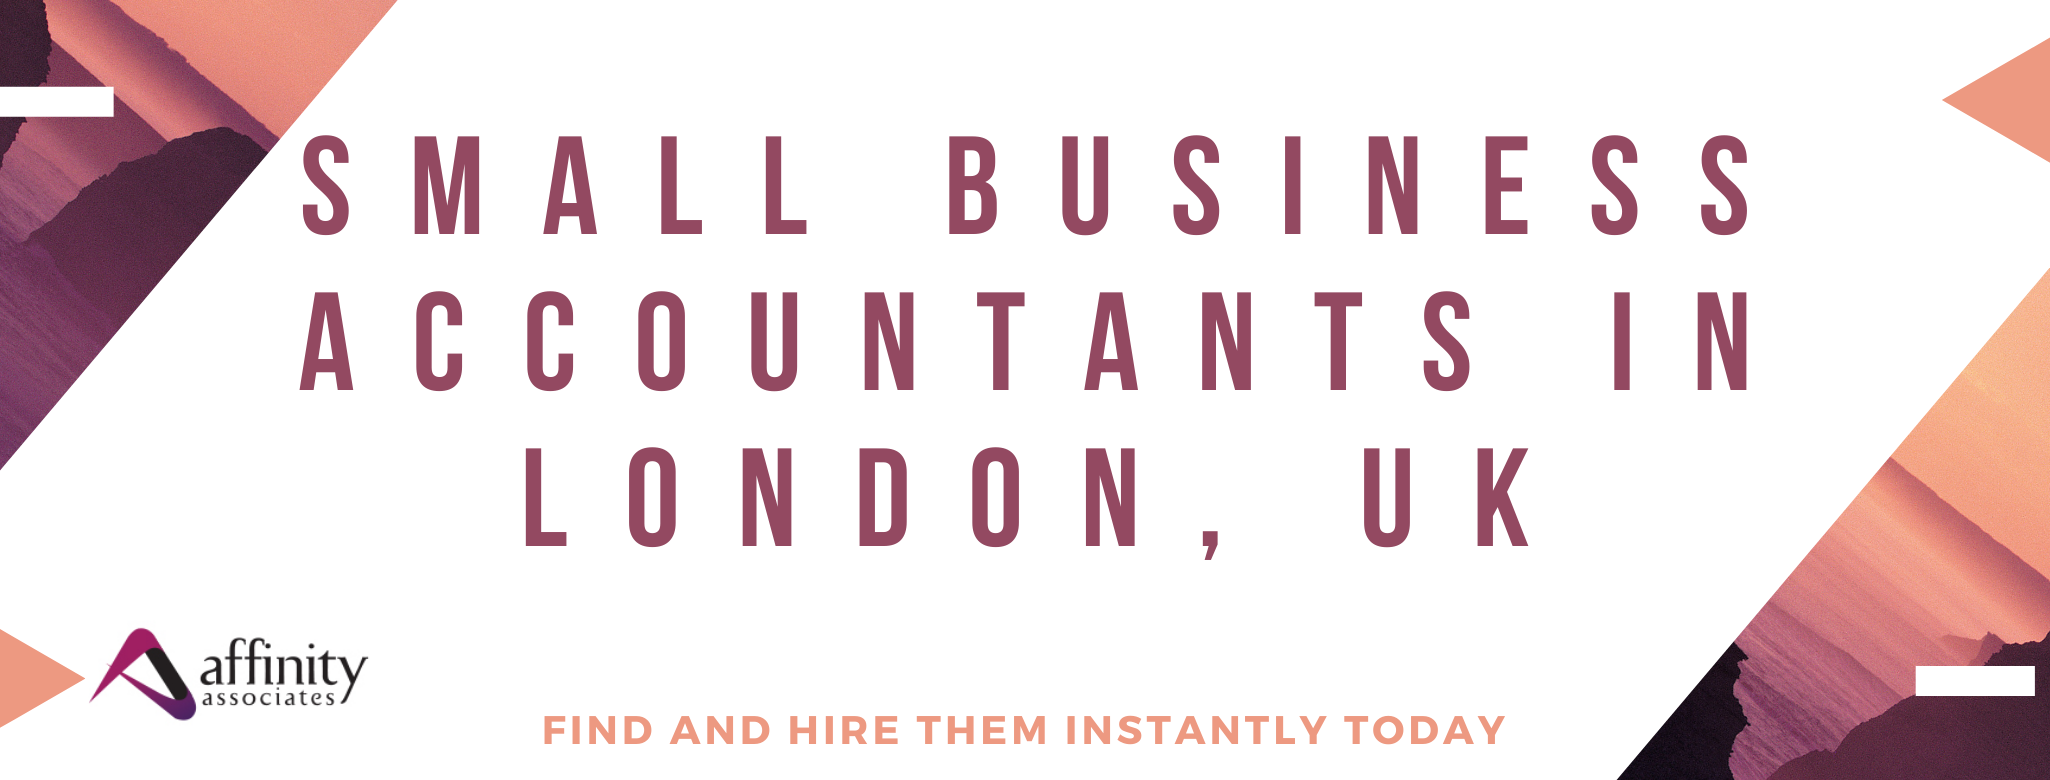 Small Business Accountants in London, UK – Find and Hire Them Instantly Today